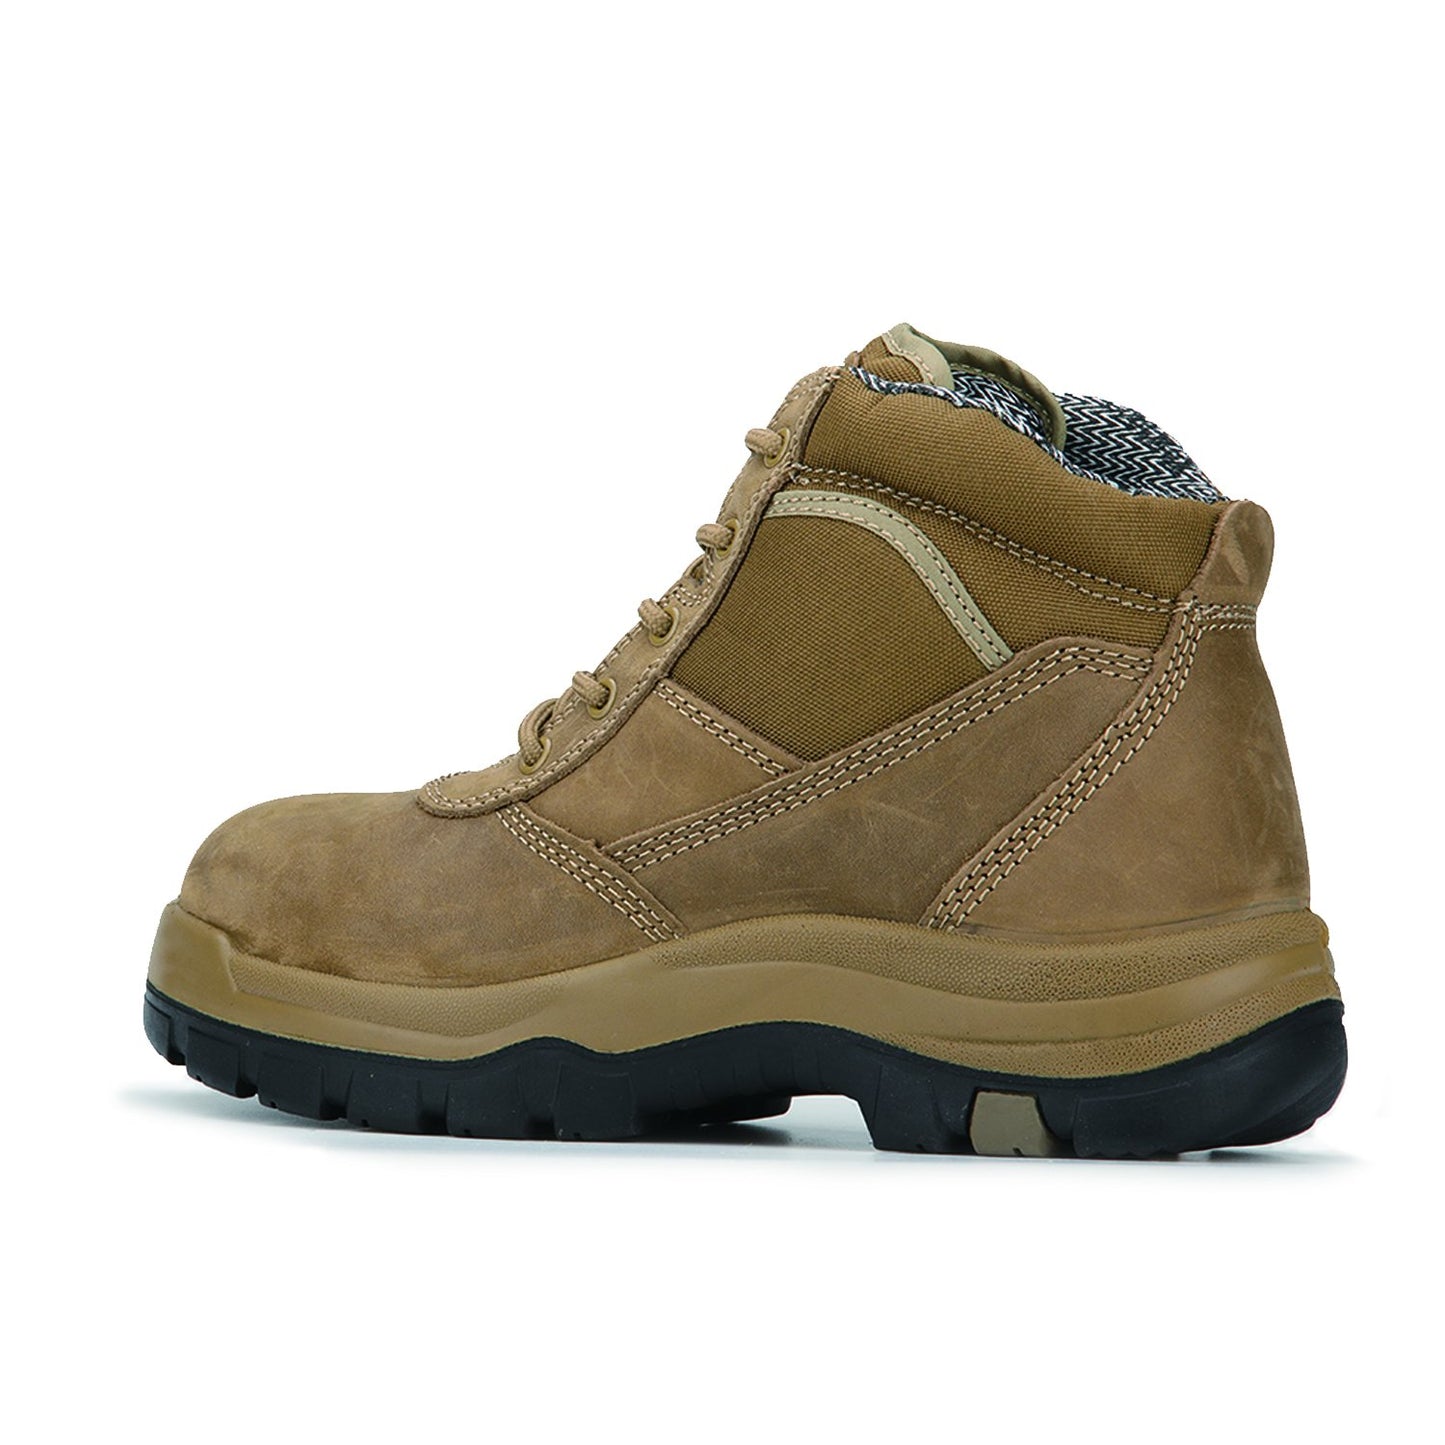 Brown 6 Inch Steel Toe Leather Work Boots AK250